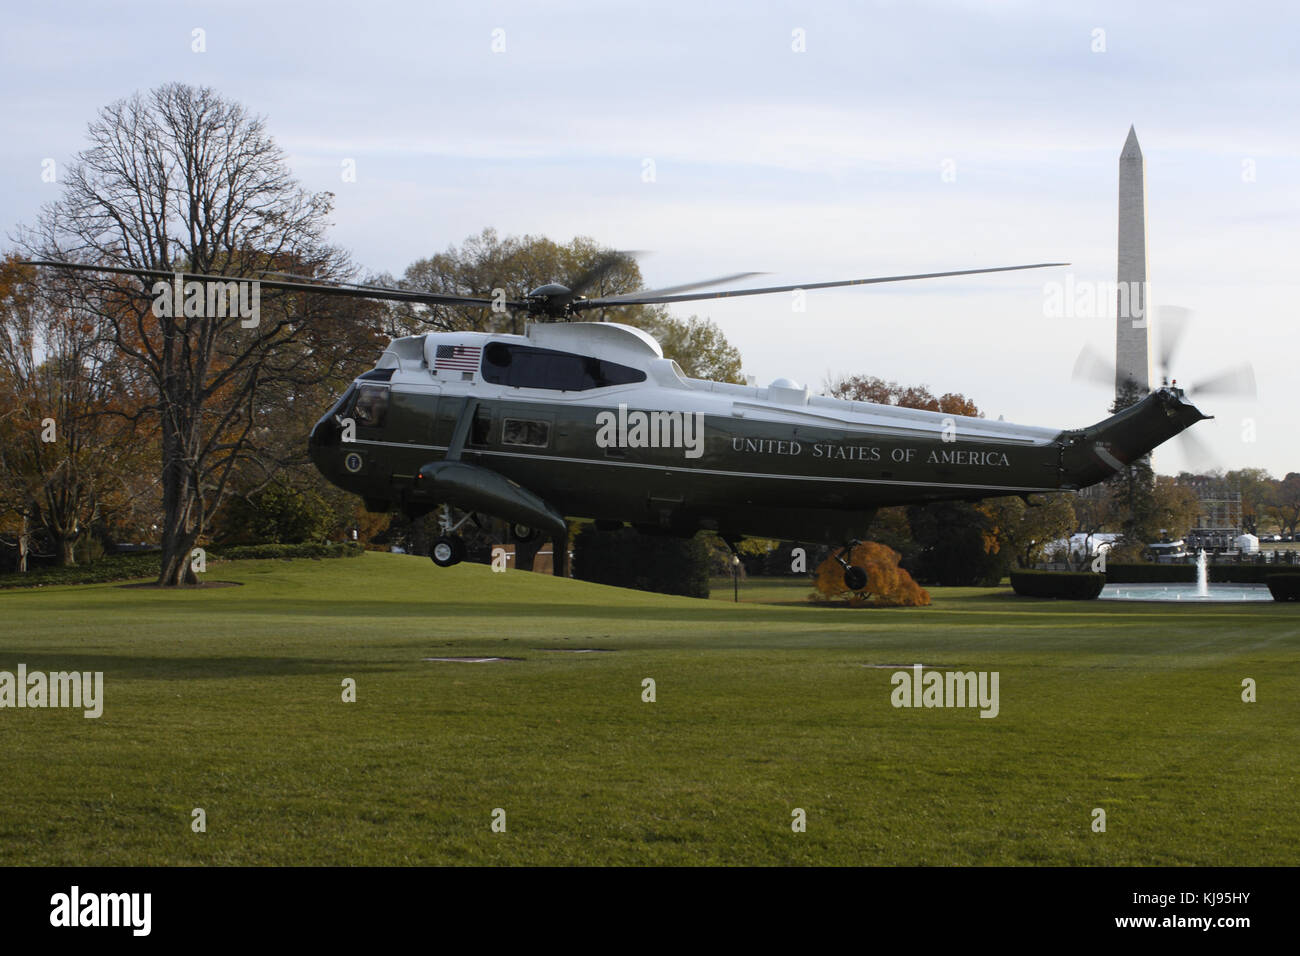 Washington, District of Columbia, USA. 21st Nov, 2017. A marine Sikorsky VH-3D Sea King helicopter, known as Marine One since President Trump is on board, seen taking off from the South Lawn of the White House as it begins the trip to take him to Joint Base Andrews. Seen in the background is the Washington Monument. Credit: Evan Golub/ZUMA Wire/Alamy Live News Stock Photo